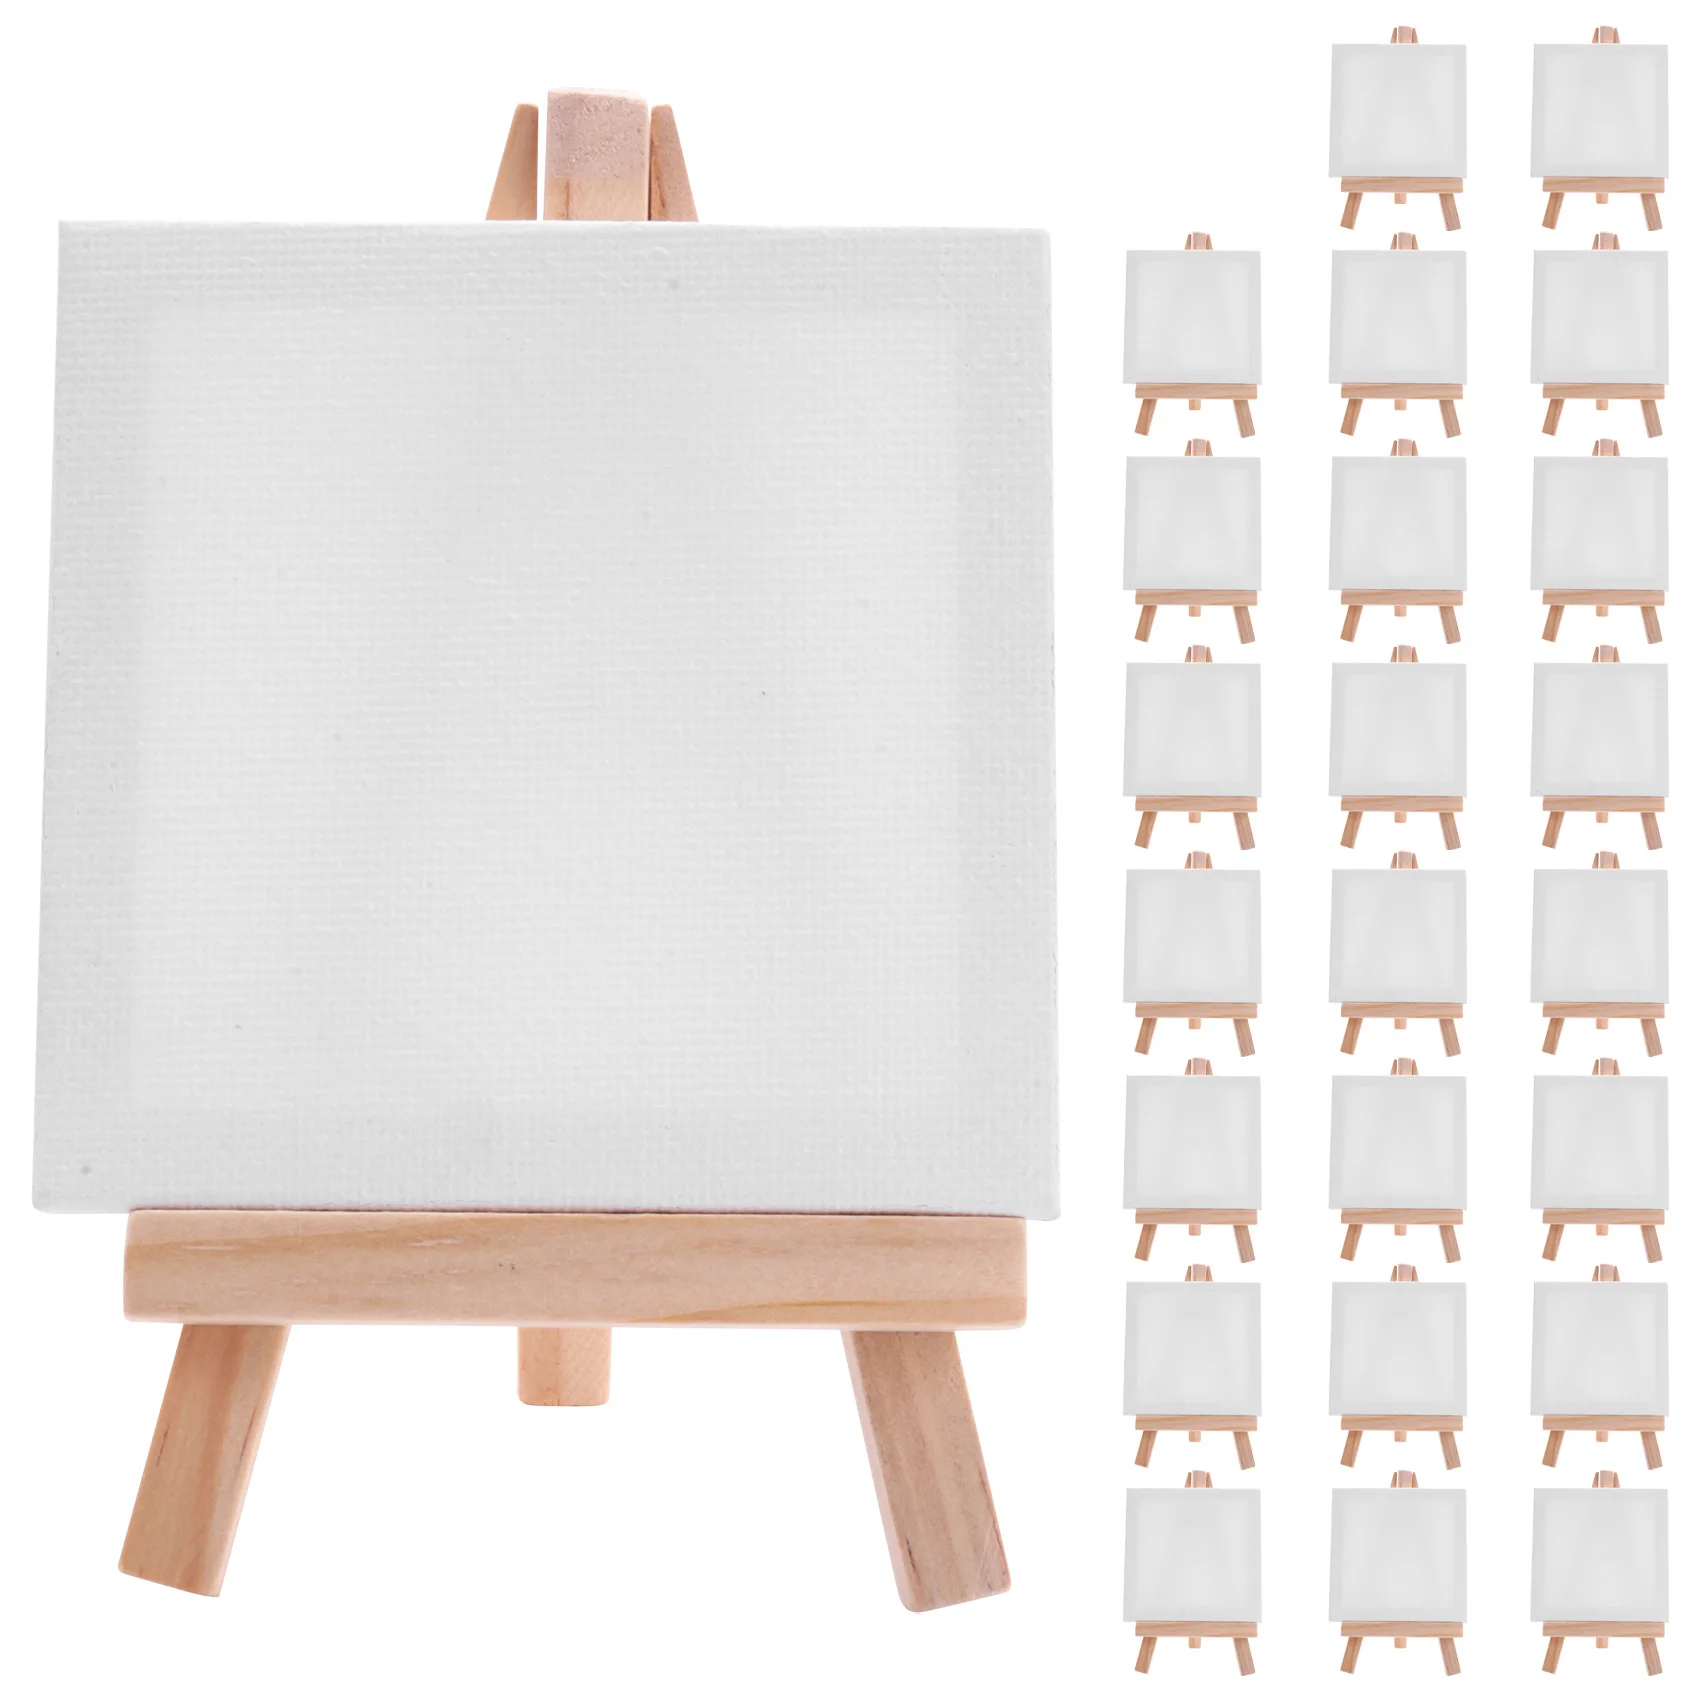 

24Set Artists 5 Inch Mini Easel +3 Inch X3 Inch Mini Canvas Set Painting Craft DIY Drawing Small Table Easel Gift